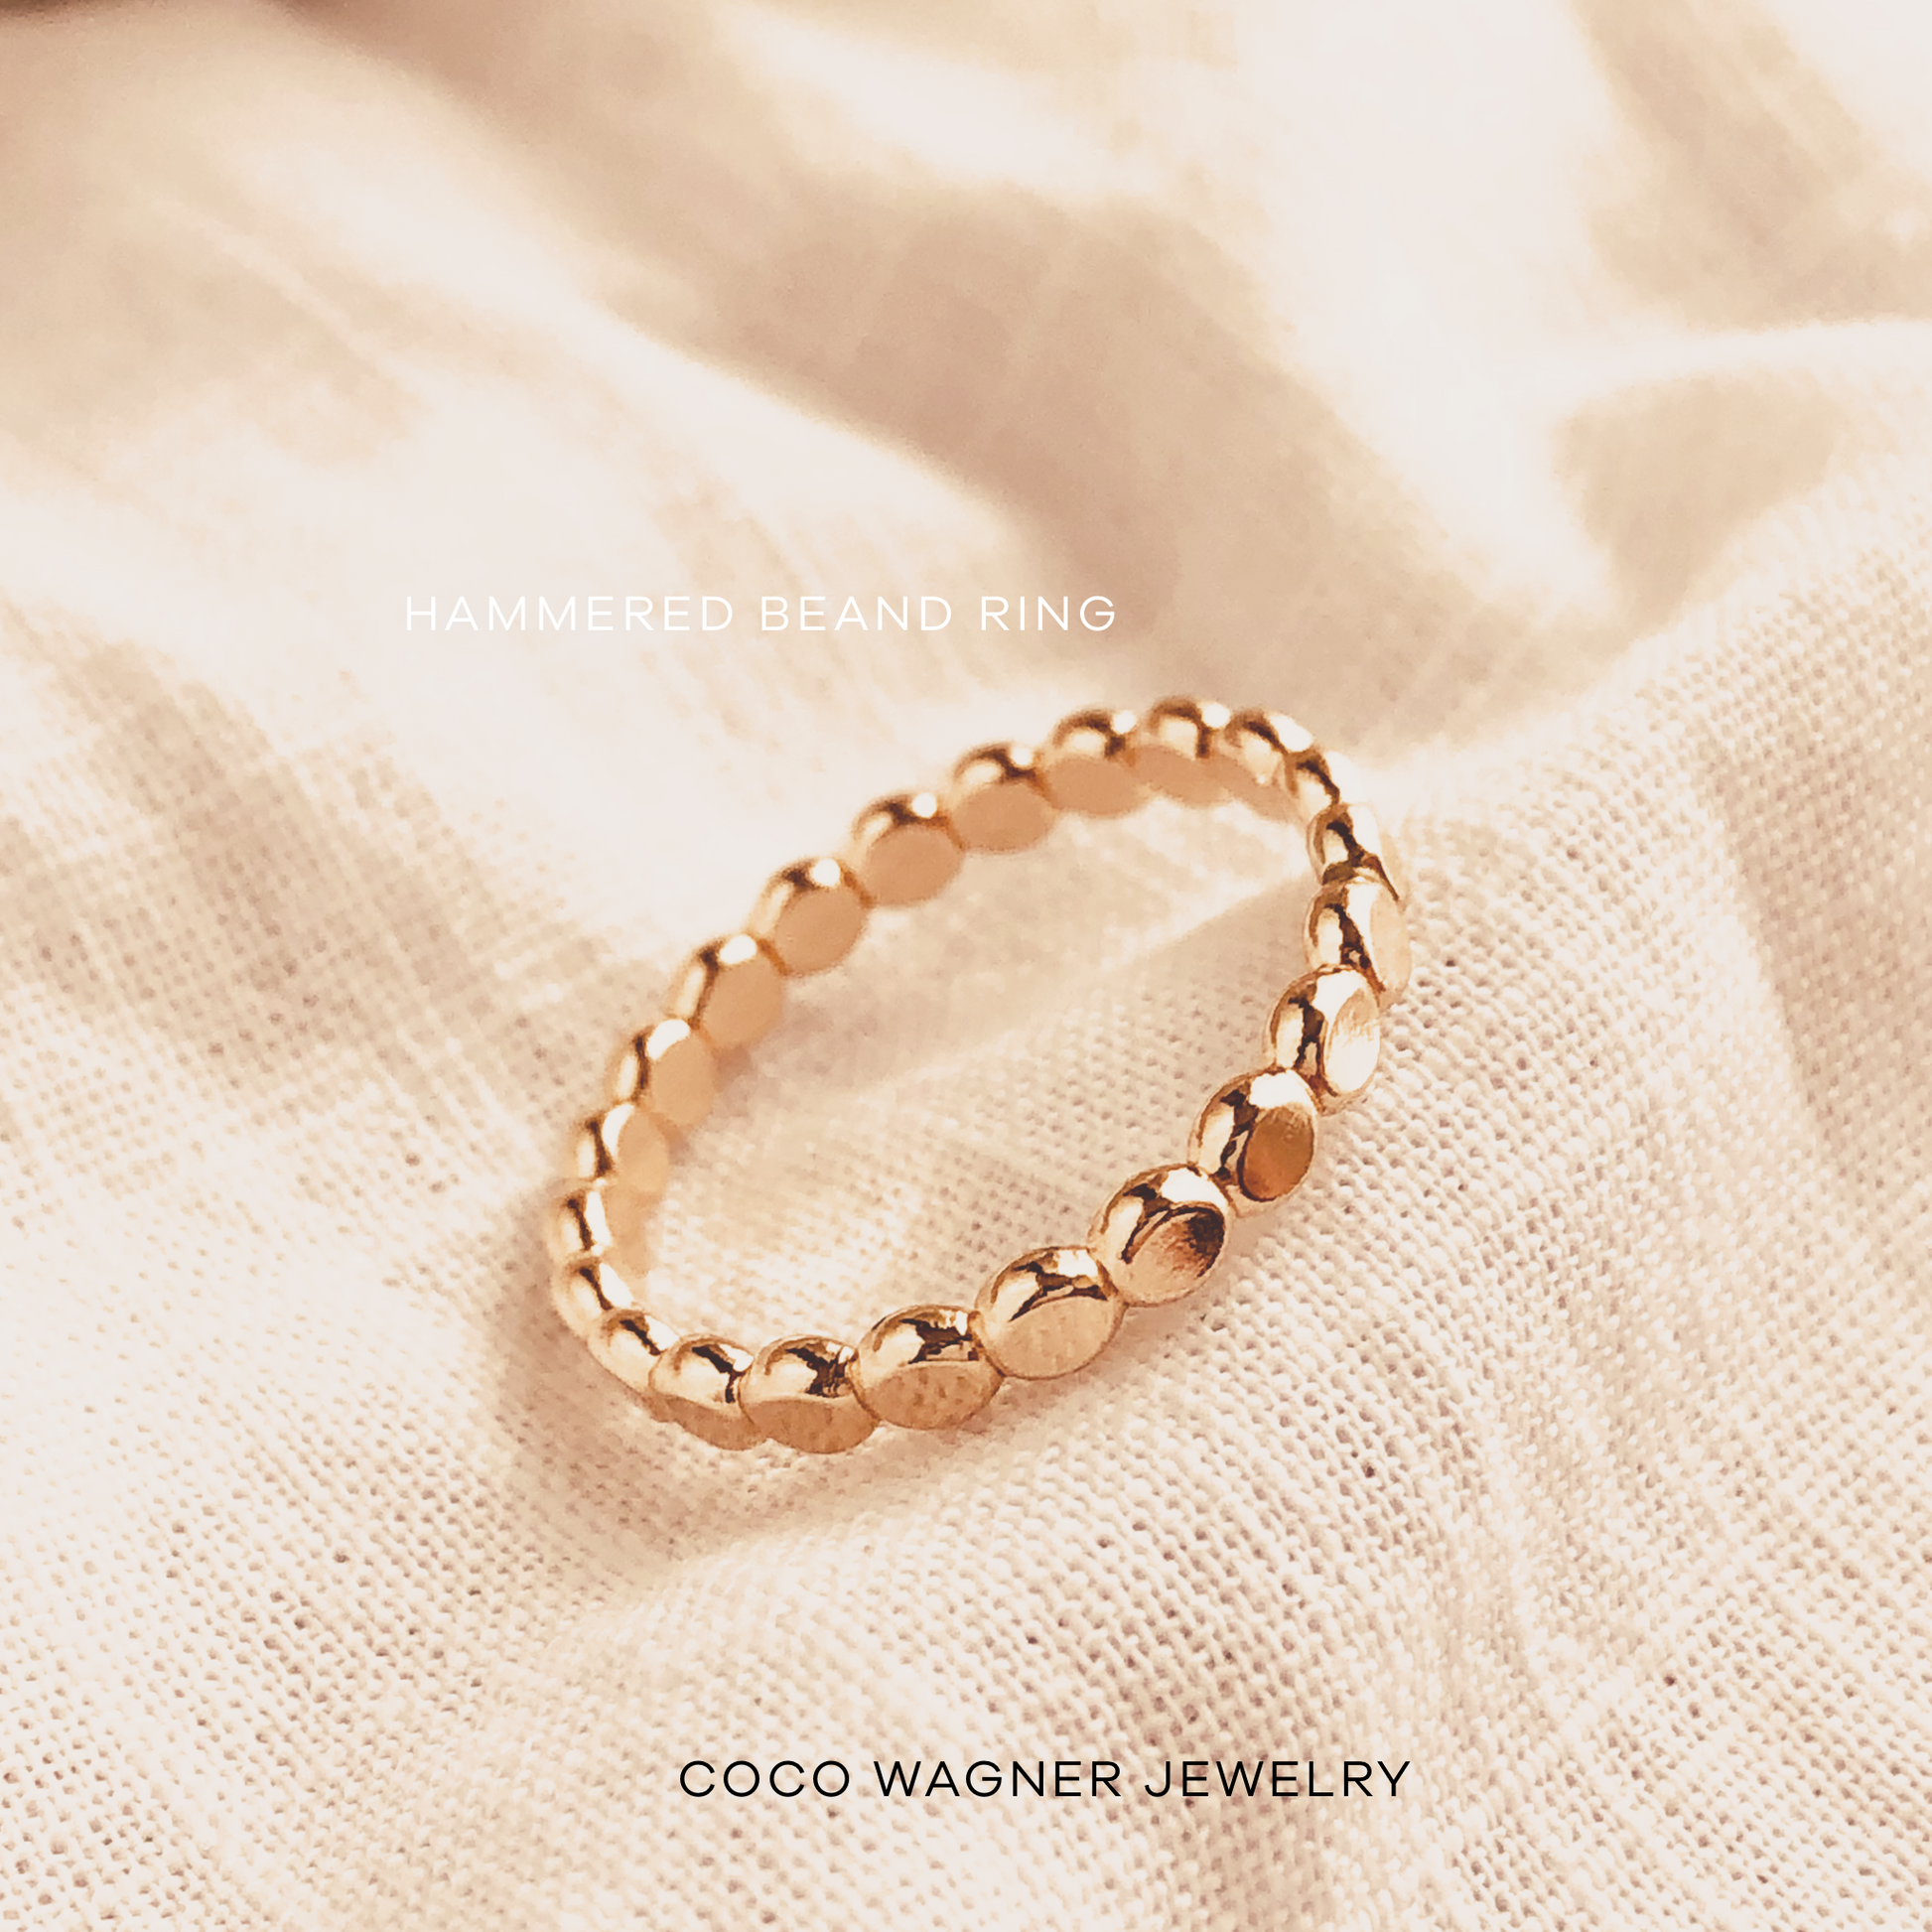 Gold Hammered Beaded Ring, Gold Dot Stacking Ring, Gold Dot Ring, Hammered Beaded Band, Dainty Ring, Stacking Ring, Gift For Her, Gift Ideas, Mothers Day Gift , Simple and Dainty, Stacking Ring,  Dainty Ring, Poppy Ring, Bead Ring, Everyday Ring, 14K gold fill Ring